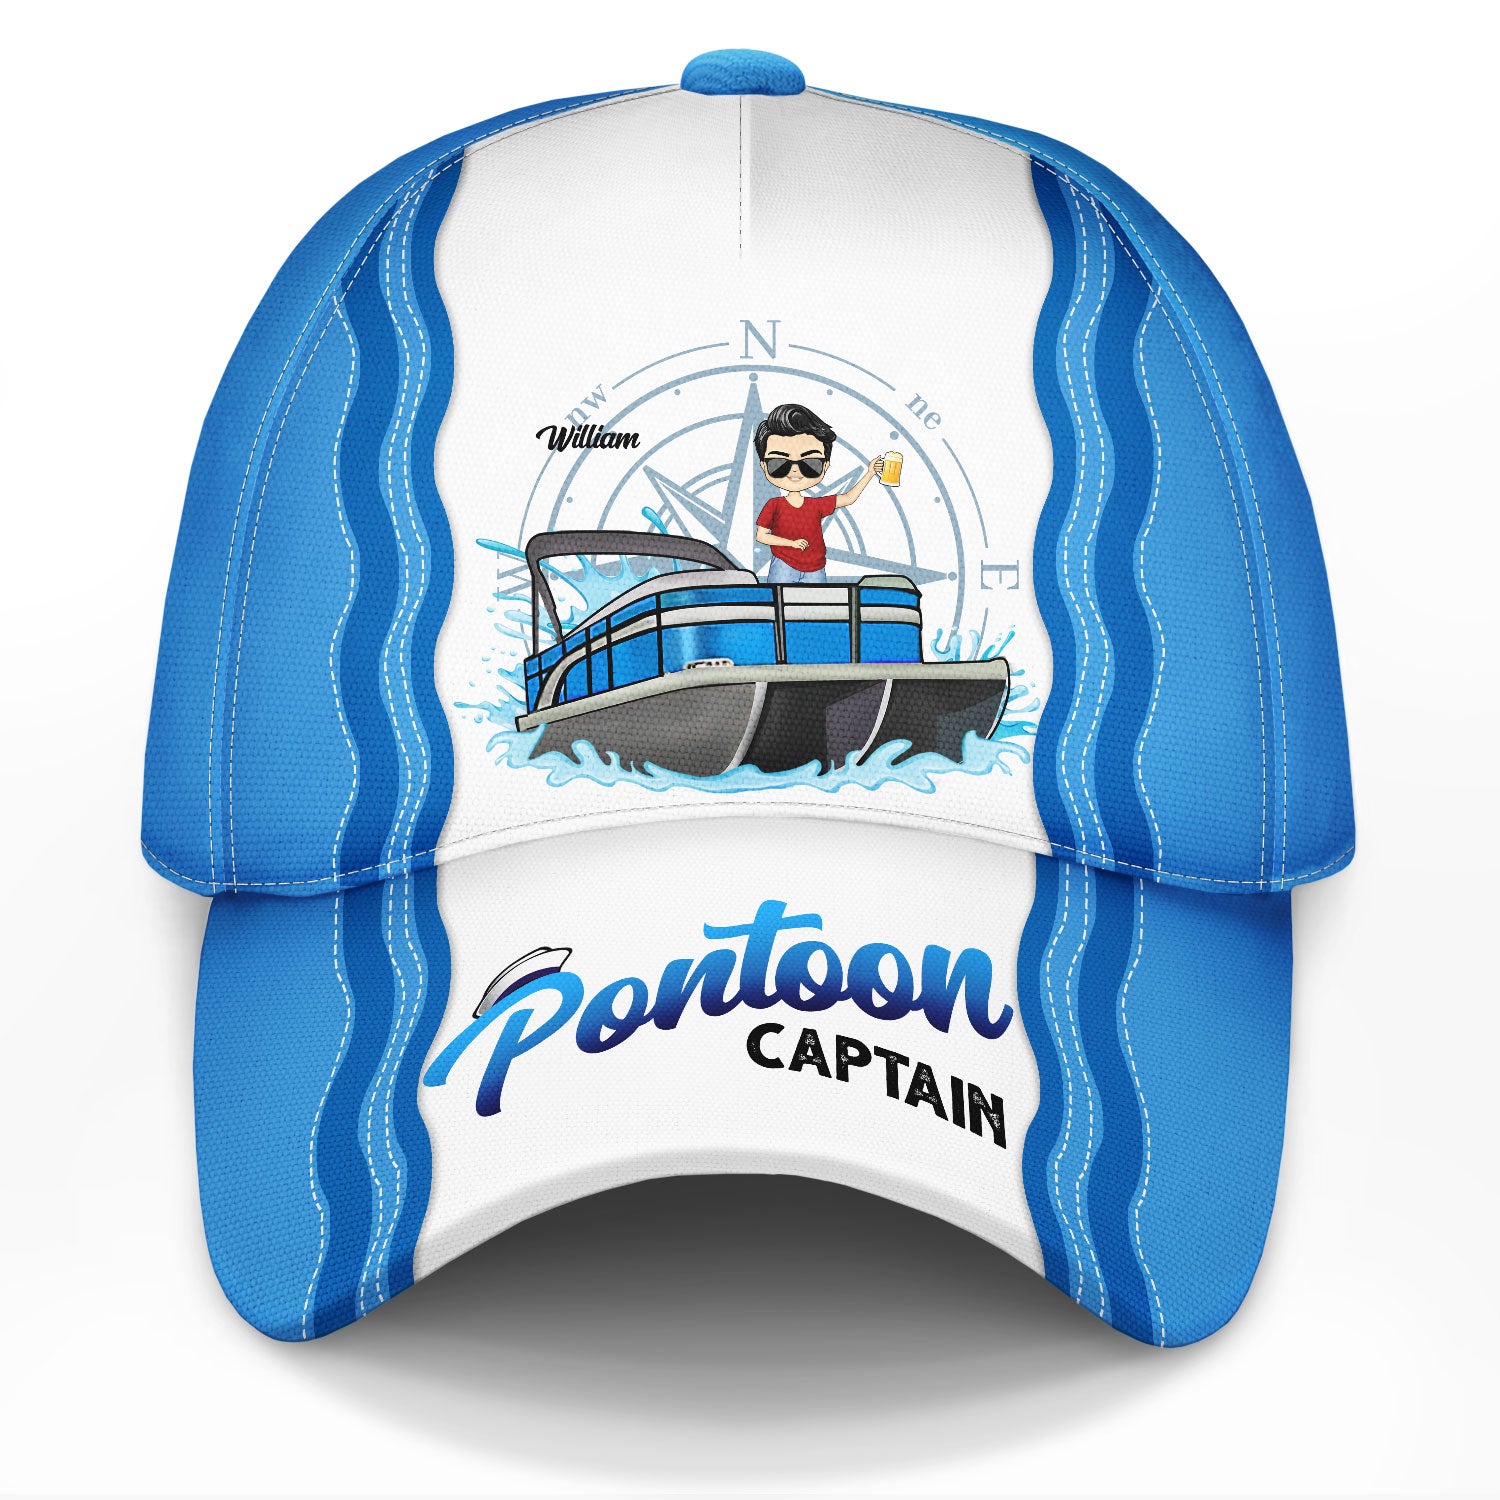 Boating Pontoon Captain Tritoon Captain - Gift For Pontooning Lovers, Lake Lovers, Travelers - Personalized Classic Cap